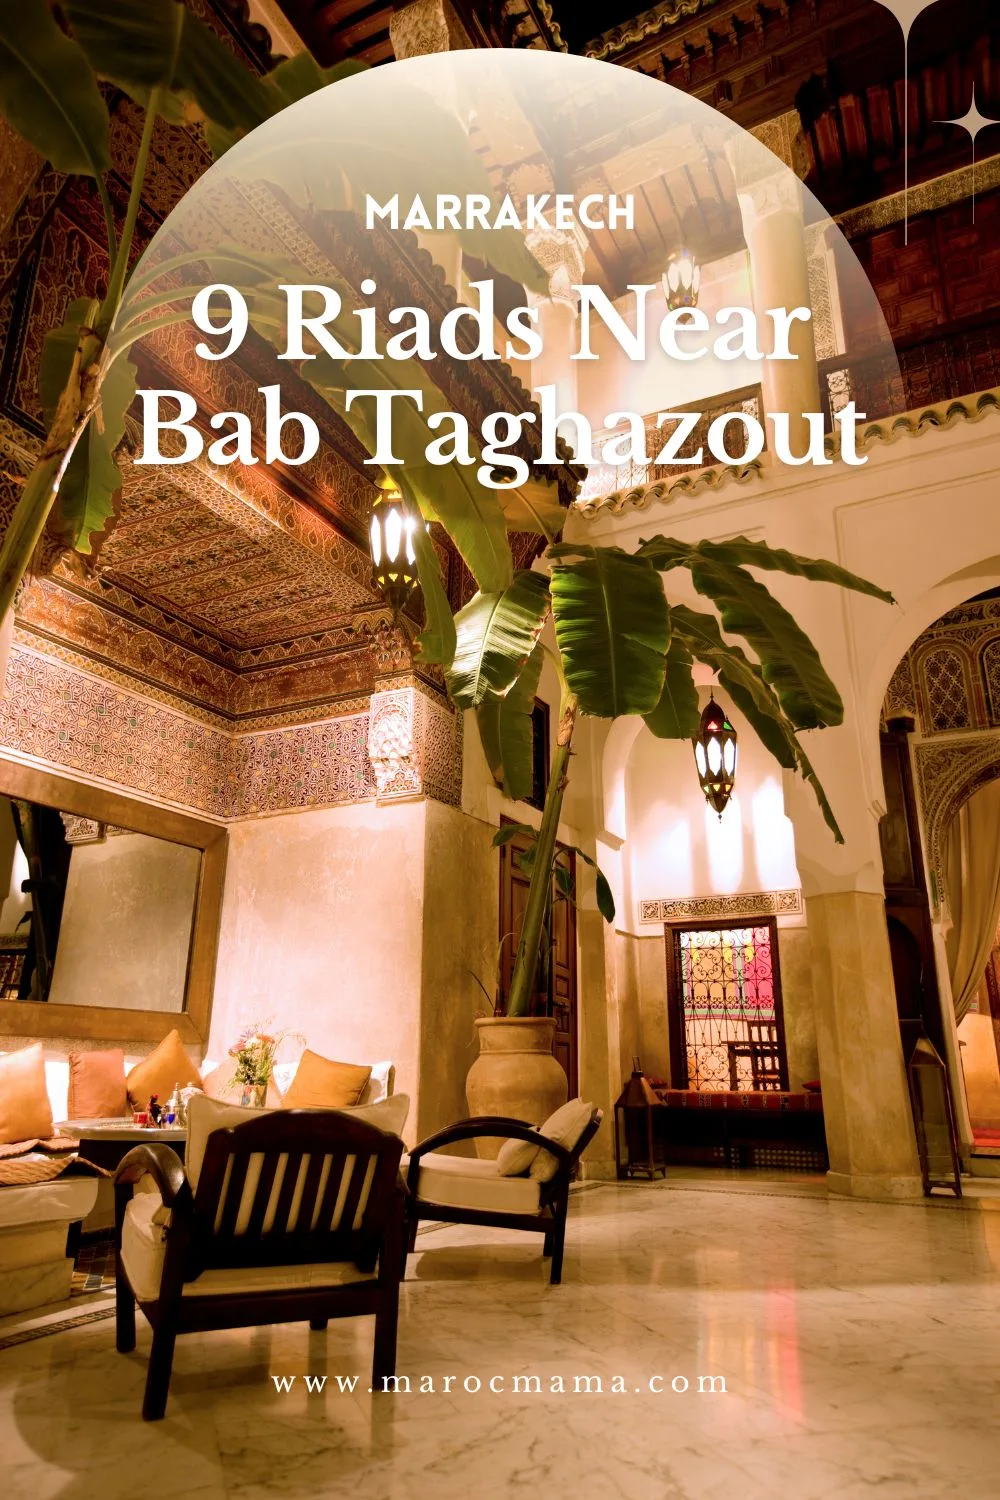 Interior of a riad in Marrakech, Morocco with the text 9 Riads Near Bab Taghazout, Marrakech